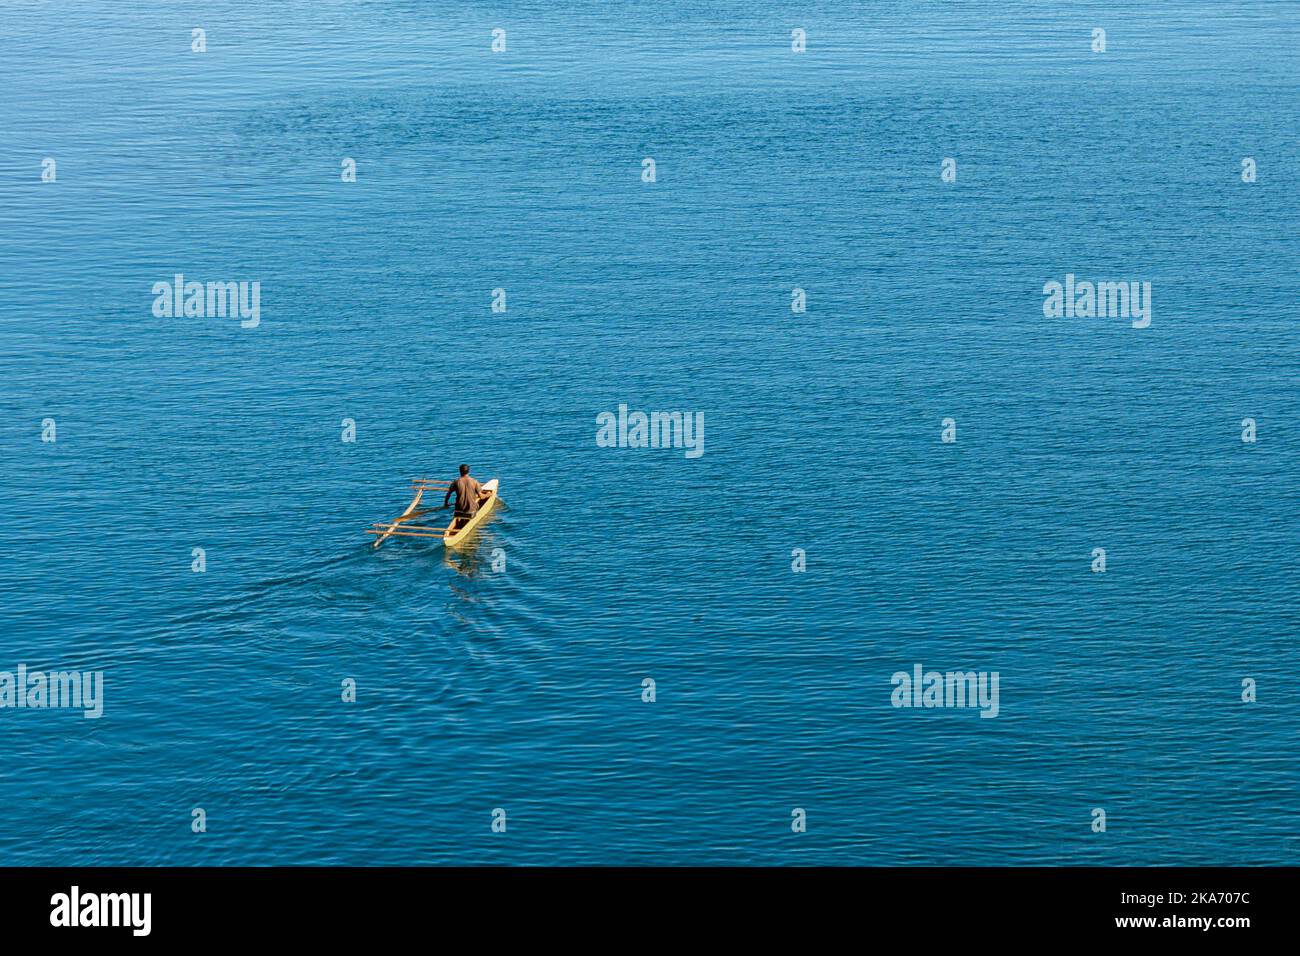 One person in traditional wooden dugout canoe fishing in Milne Bay Papua New Guinea Stock Photo